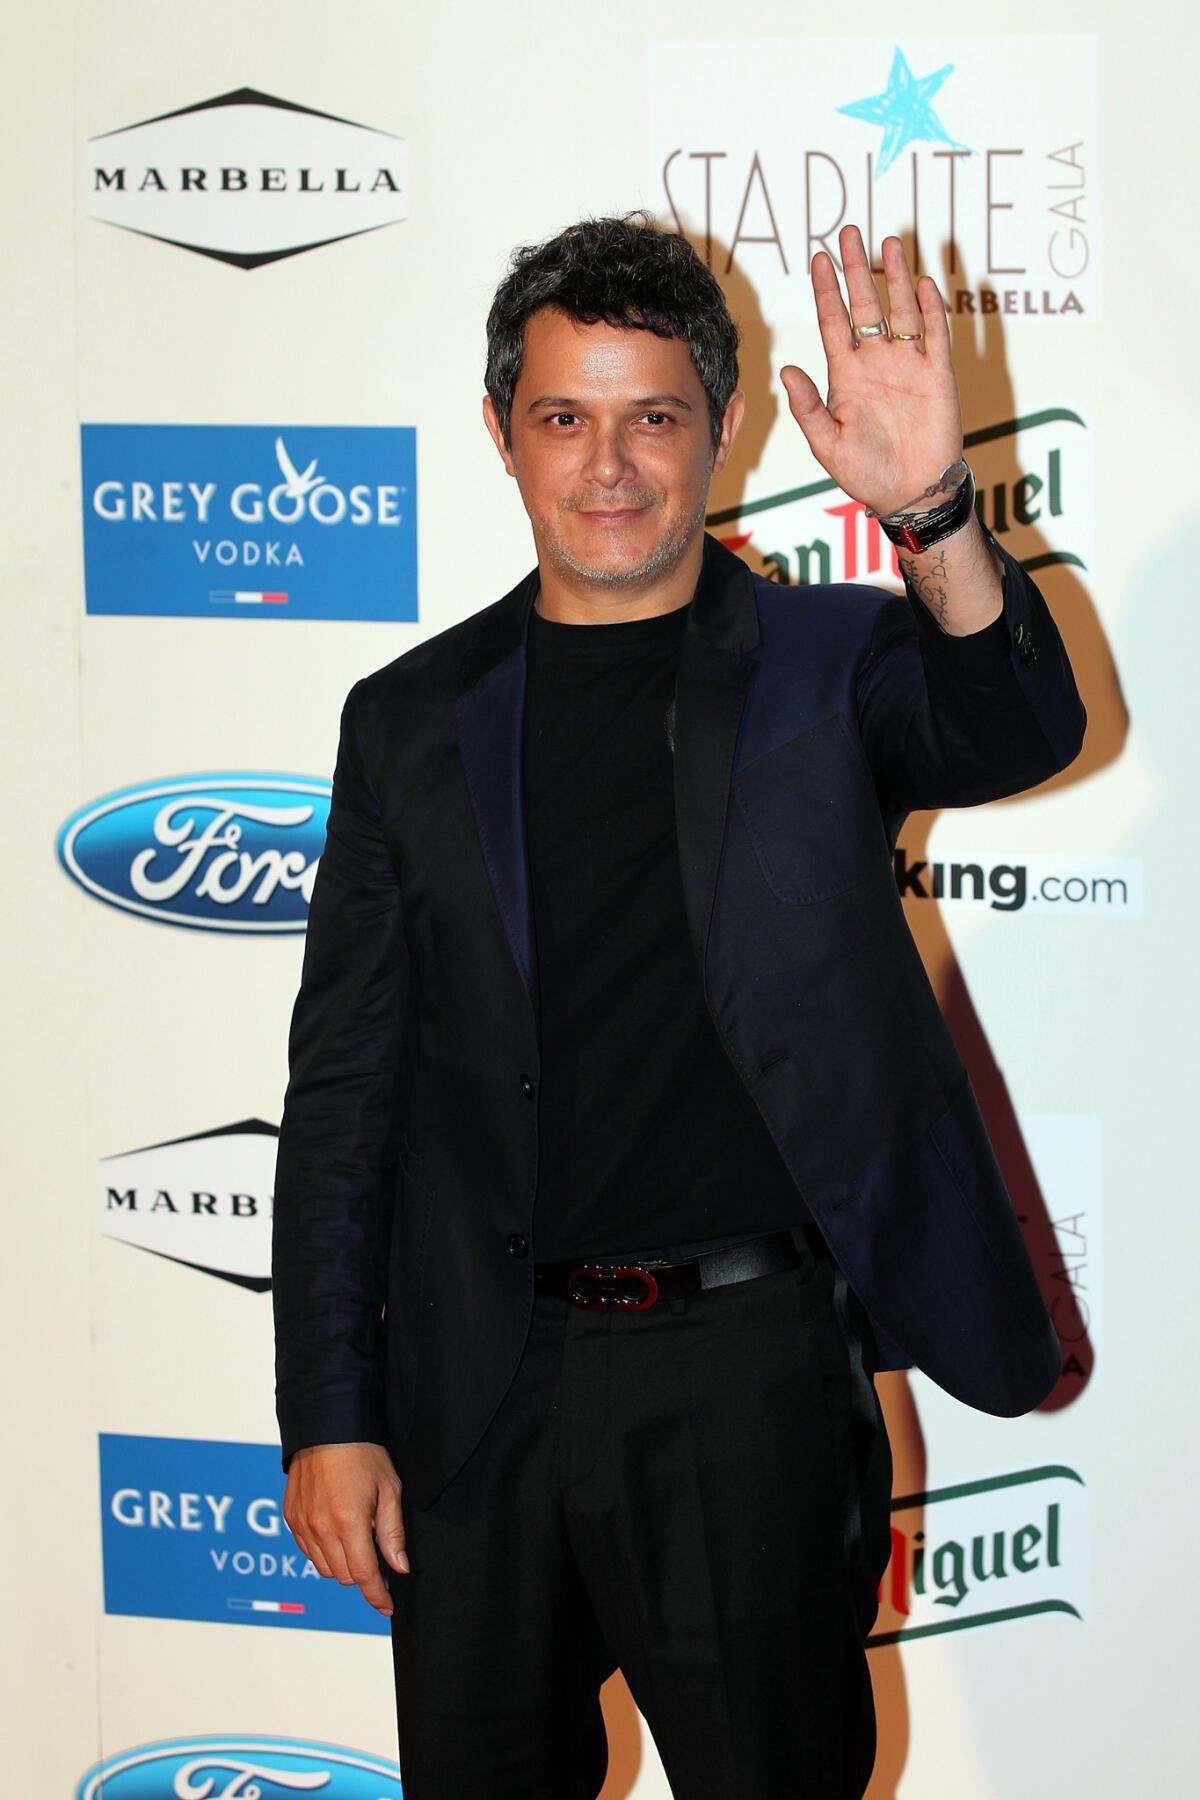 Alejandro Sanz attends the 4rd annual Starlite Charity Gala on August 10, 2013 in Marbella, Spain.